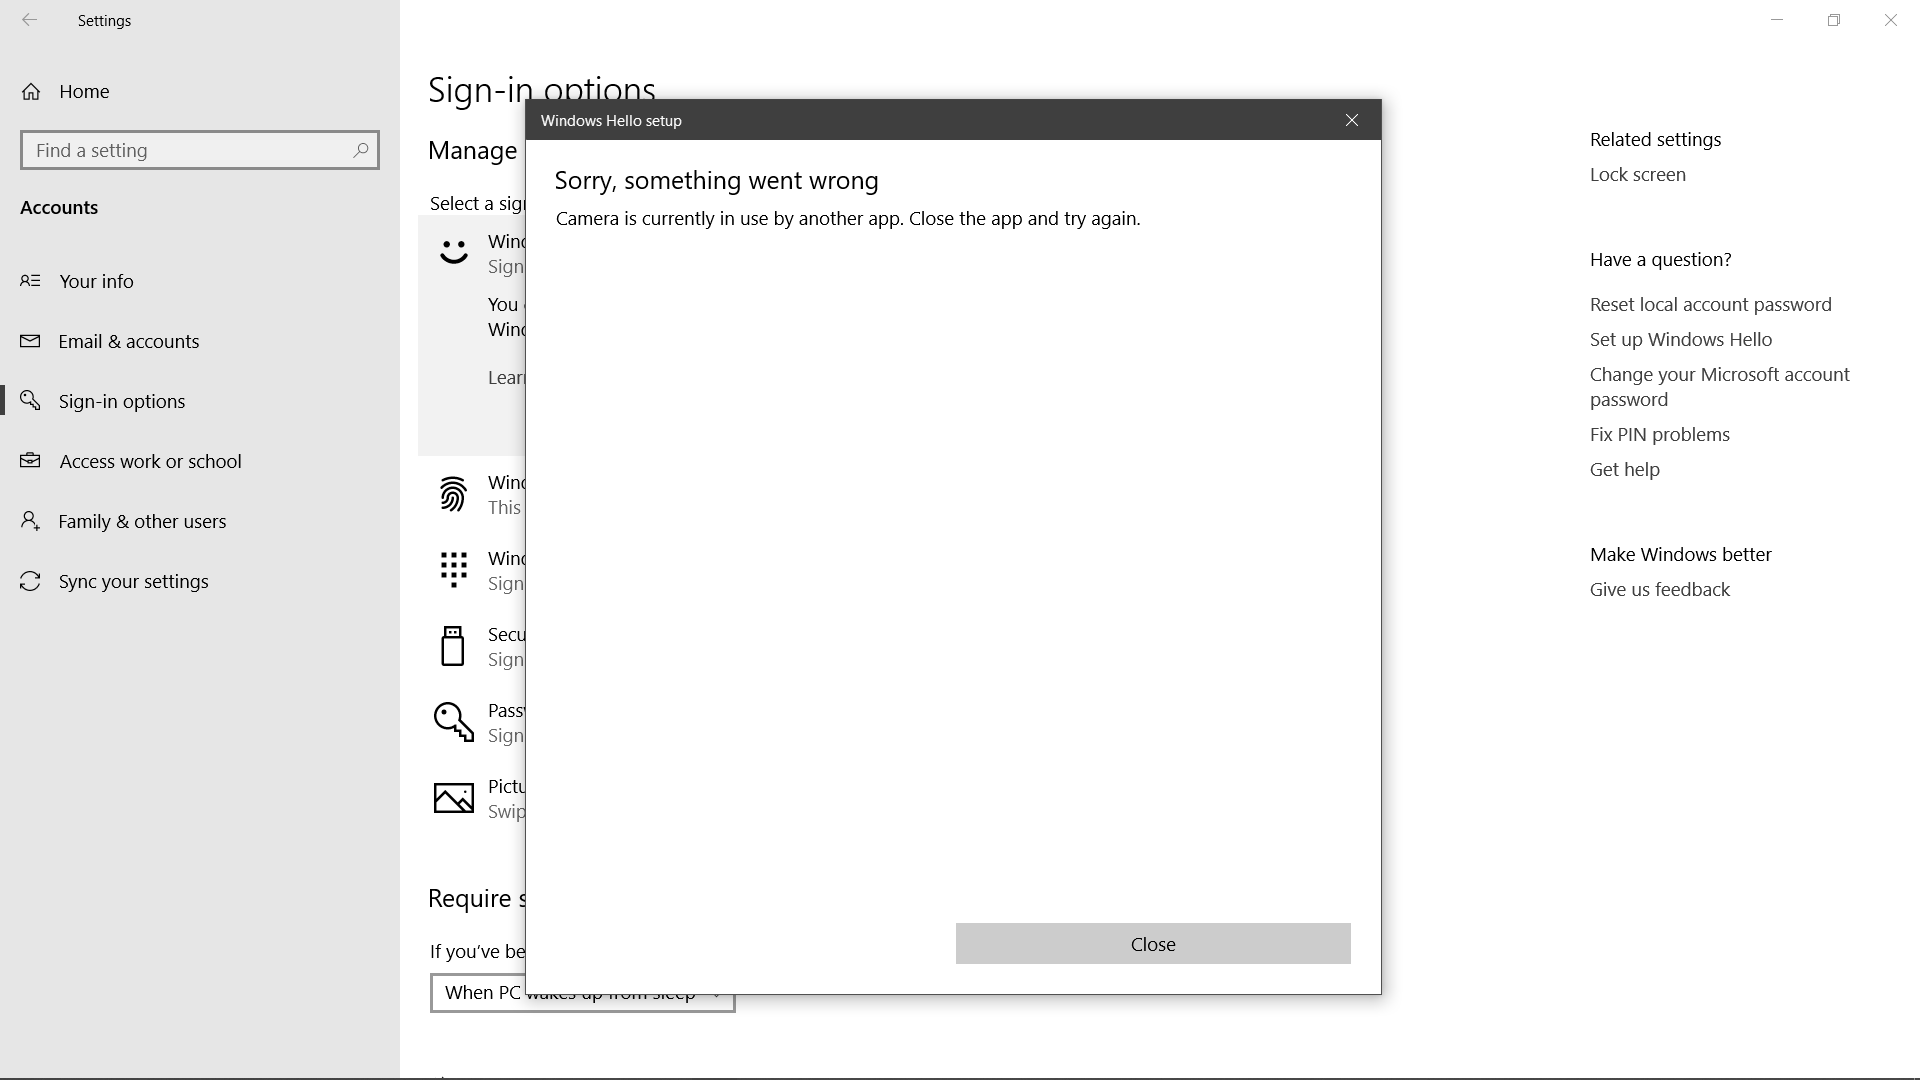 Camera is being used by another app - Windows Hello Face Setup 909ffda6-02b0-4c47-b7e2-9a7652f900e1?upload=true.png